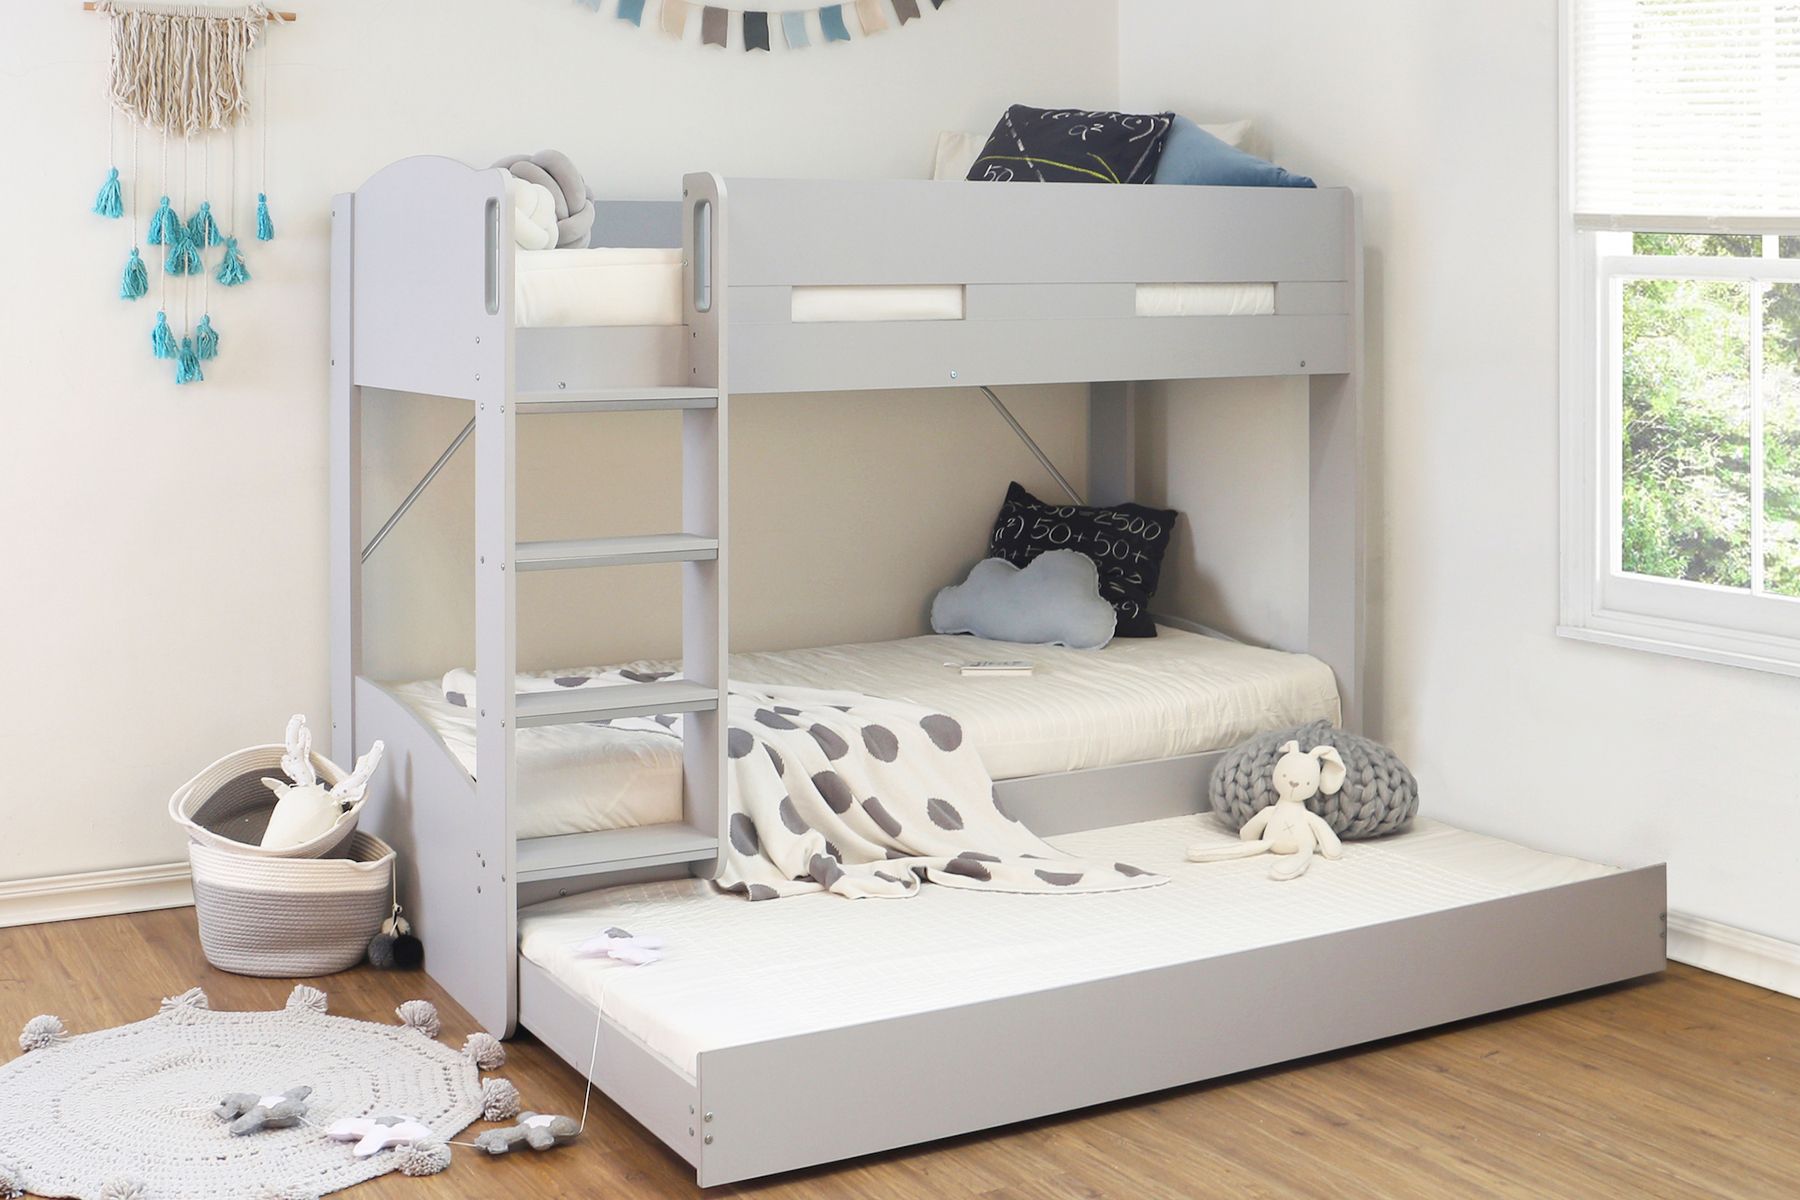 Flintshire Billie Wooden Bunk Bed With, How To Put Together A Wooden Bunk Bed